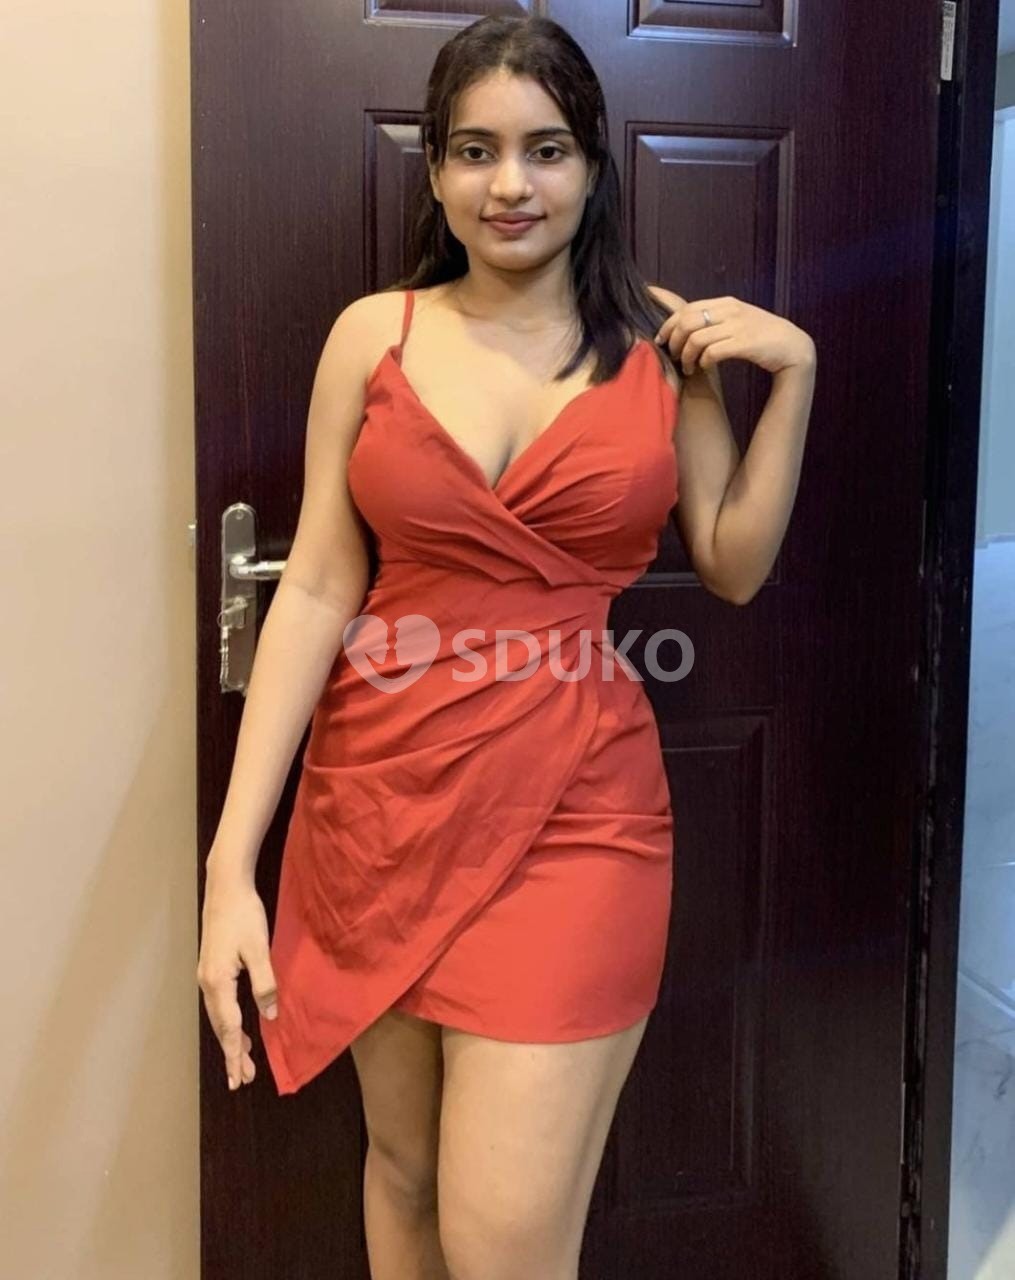 SHIVANI (Kolkata available 24x7) 722___398__3705 WHATSAPP PHONE AFFORDABLE CHEAPEST RATE SAFE GIRL SERVICE AVAILABLE OUT